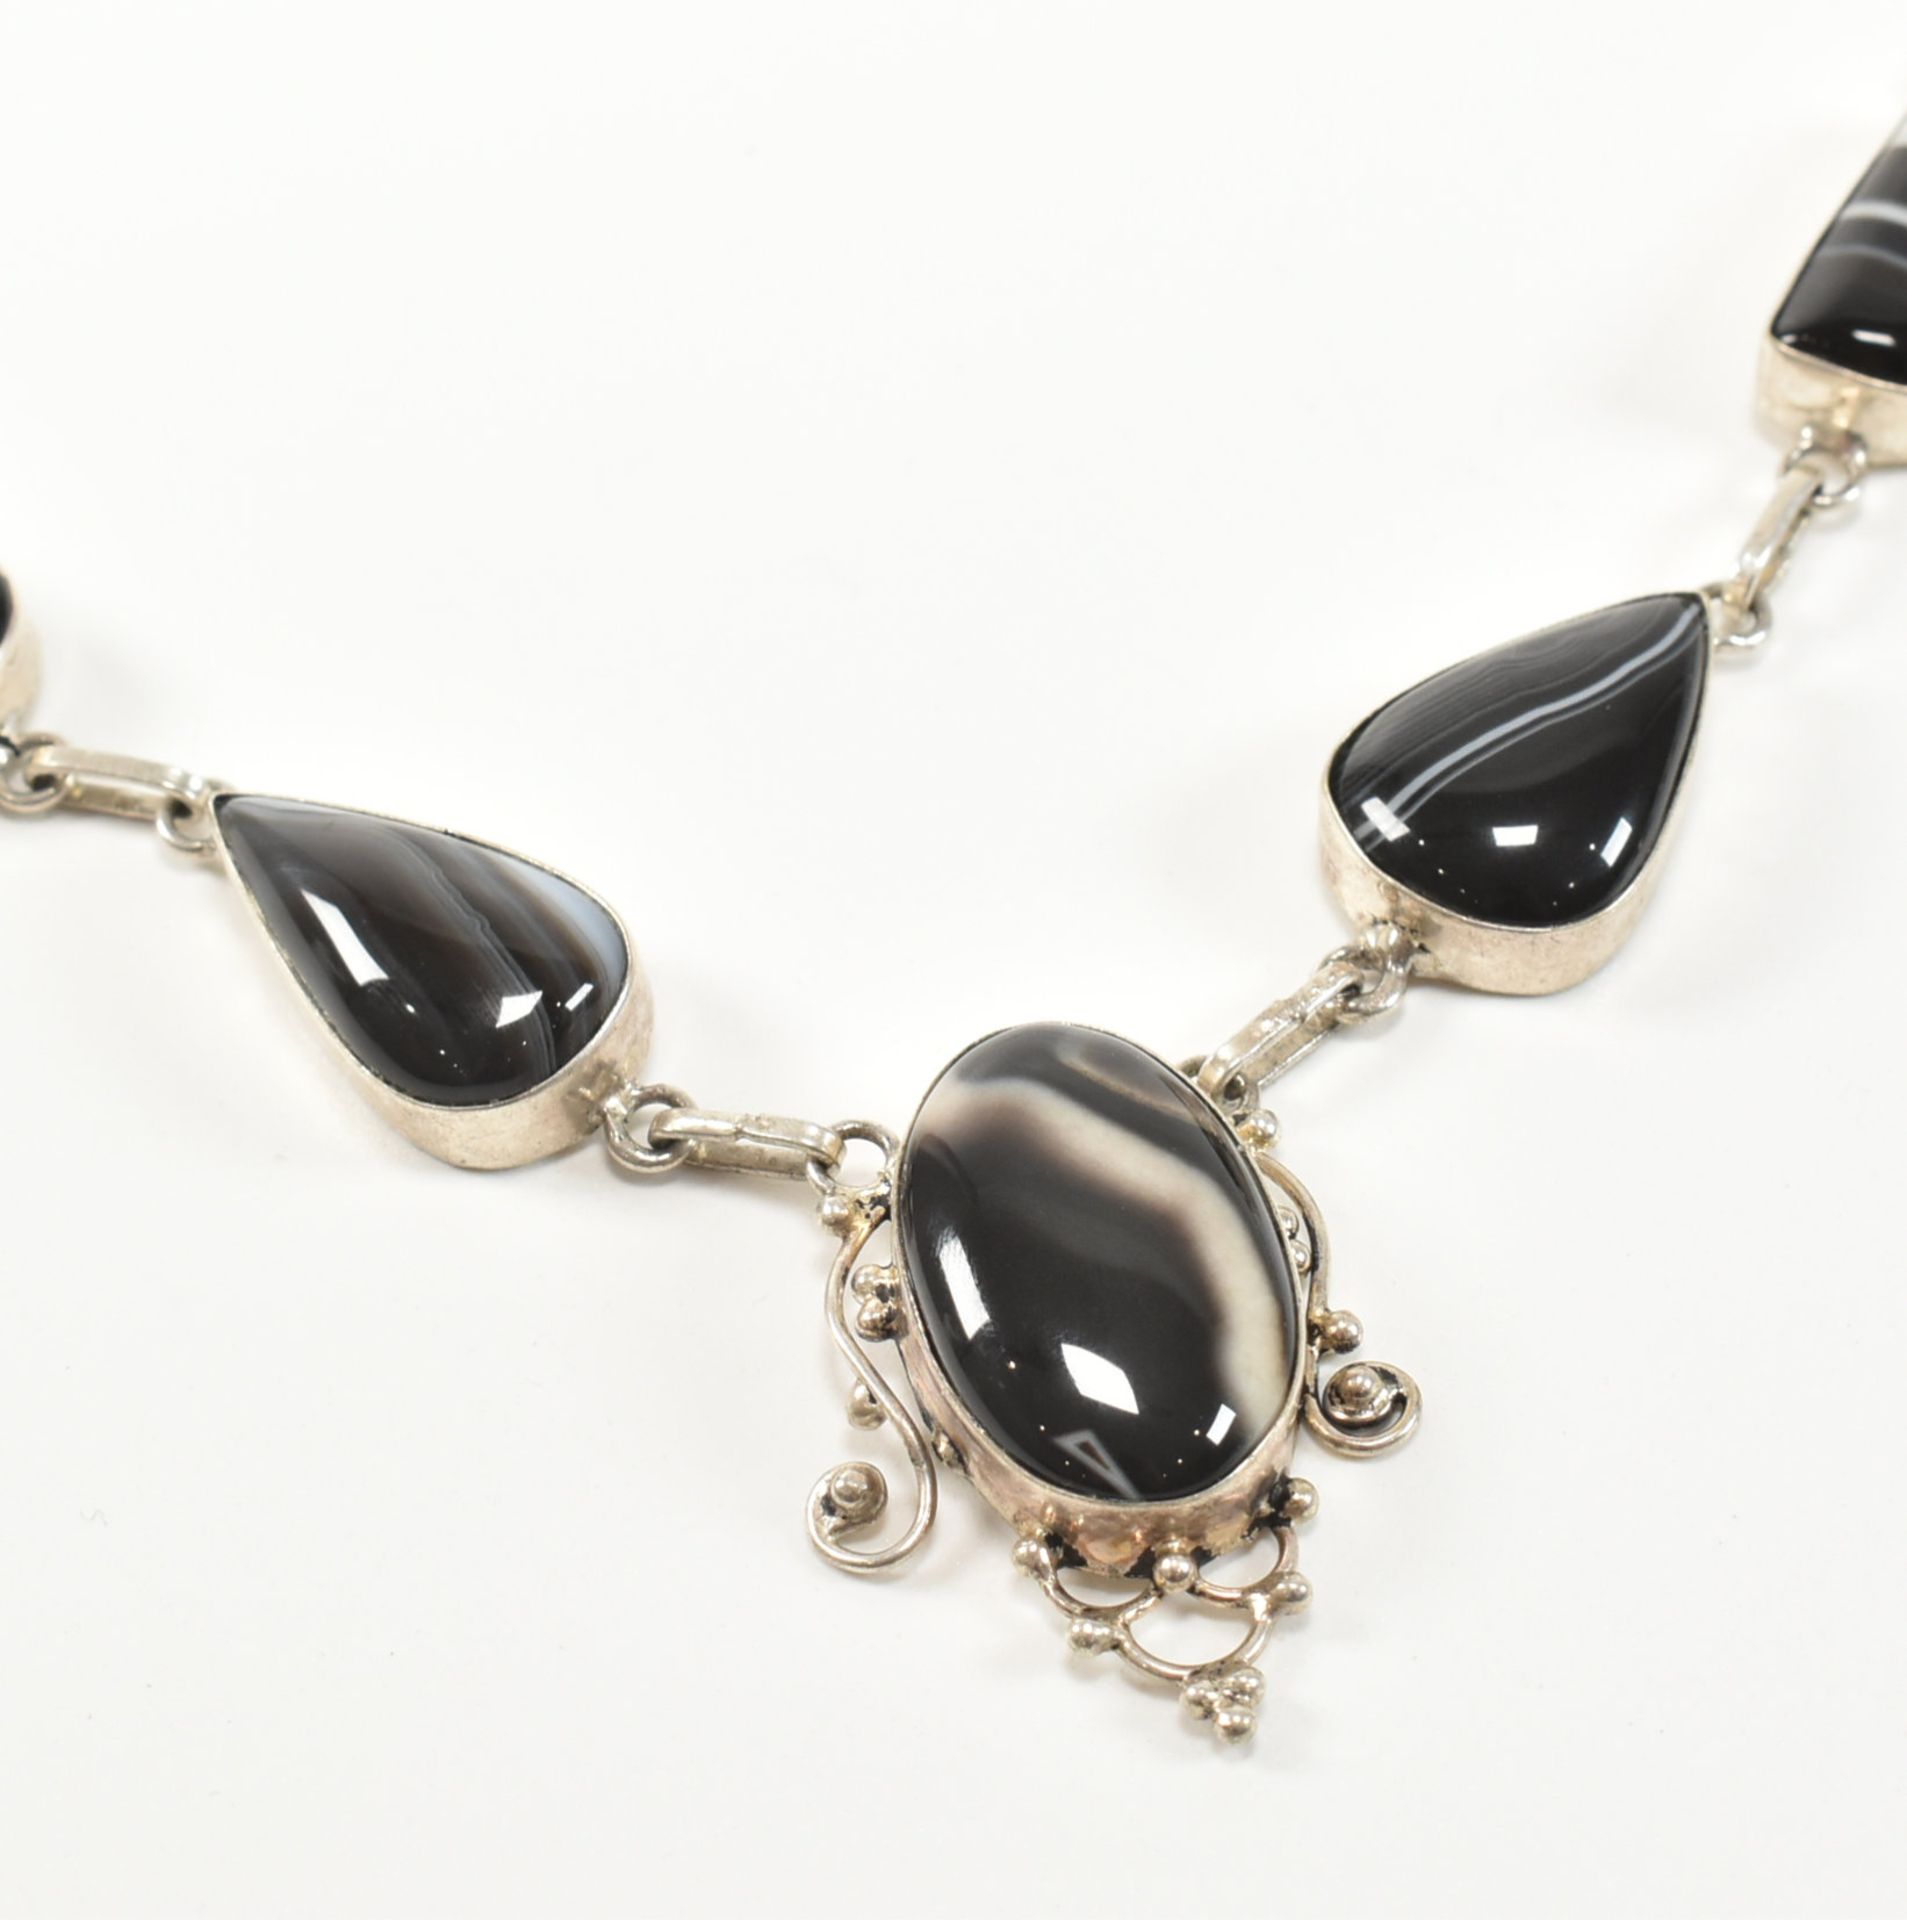 TWO 925 SILVER & BLACK STONE CHAIN NECKLACES - Image 2 of 5